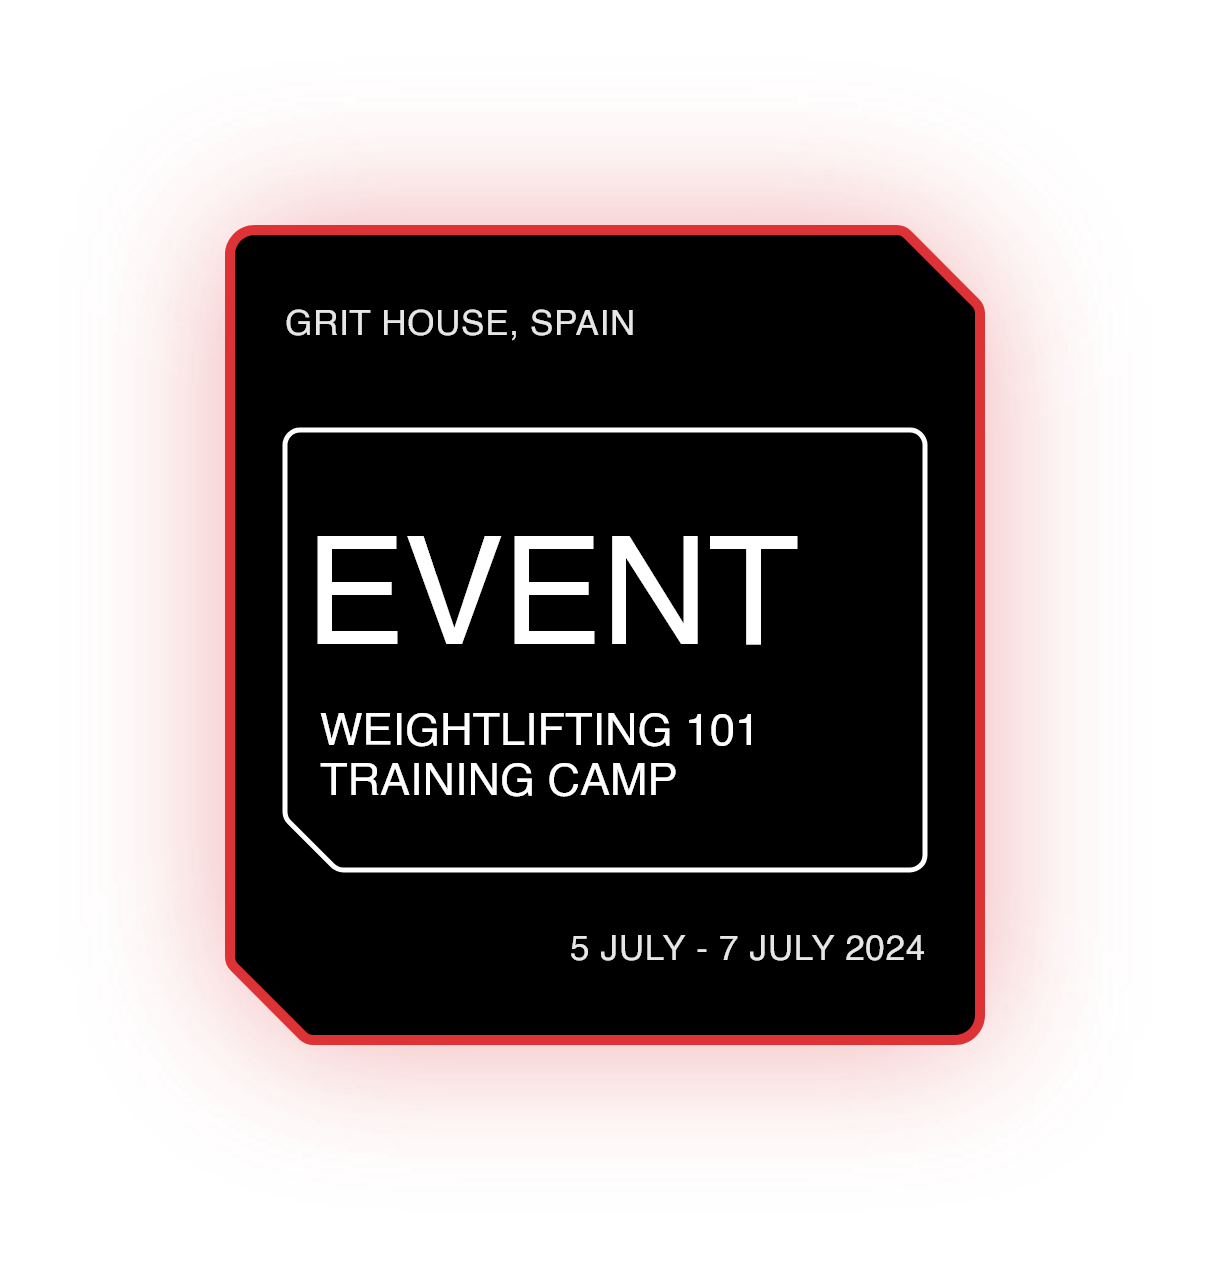 Weightlifting 101 Training Camp - Barcelona, Spain